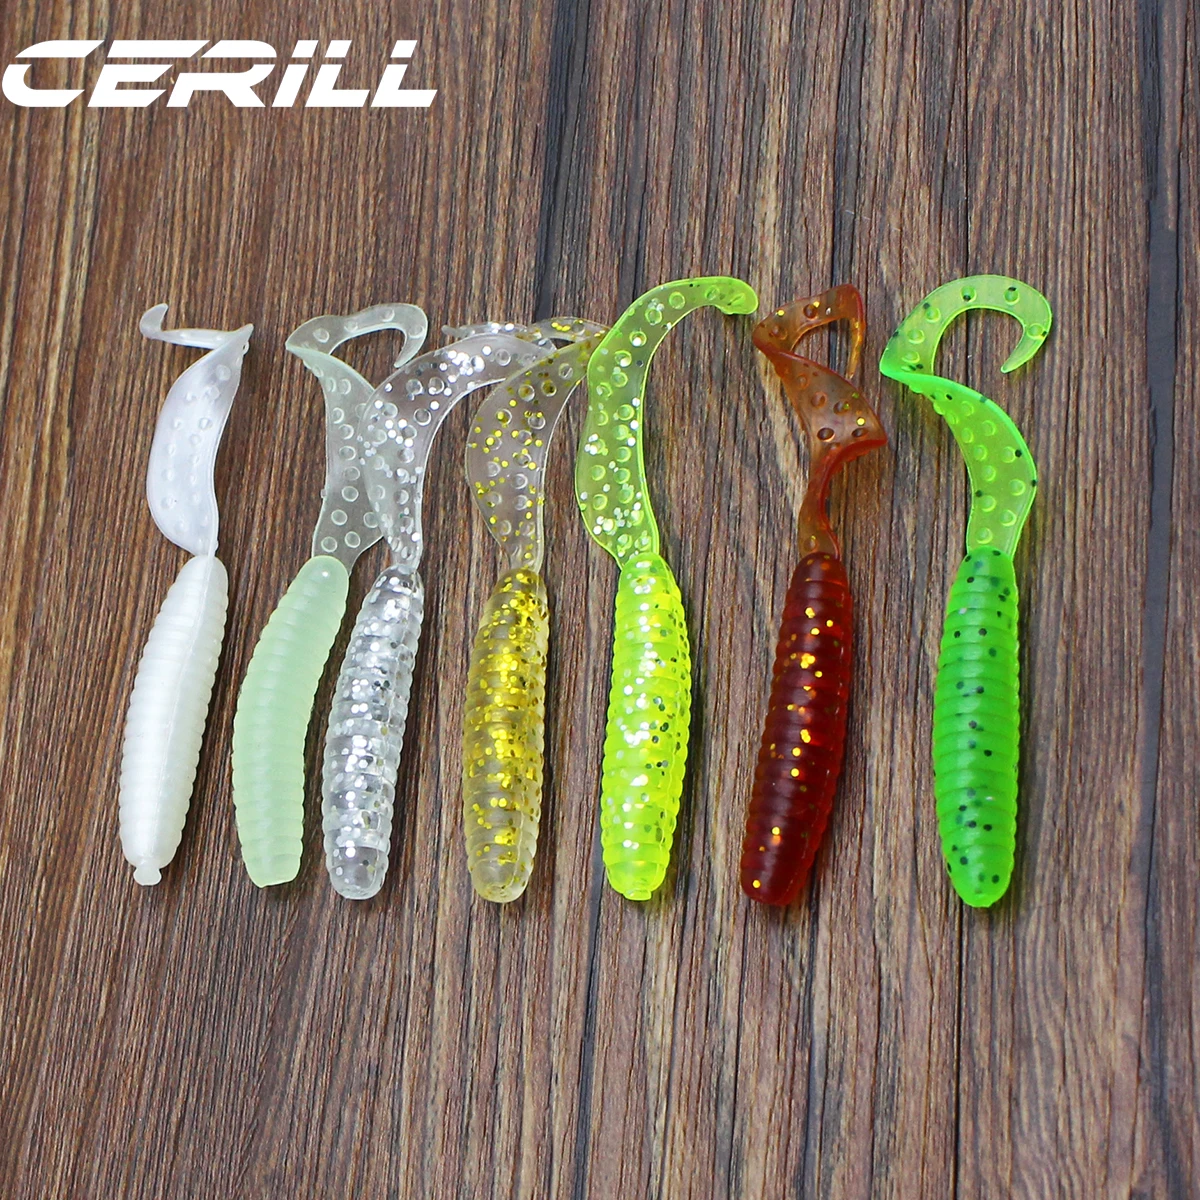 

Lot 30 Cerill 2.2g Spiral Tail Jig Wobblers Soft Fishing Lures Worm Bait Bass Carp Artificial Swimbait Pike Shrimp Lure Tackle